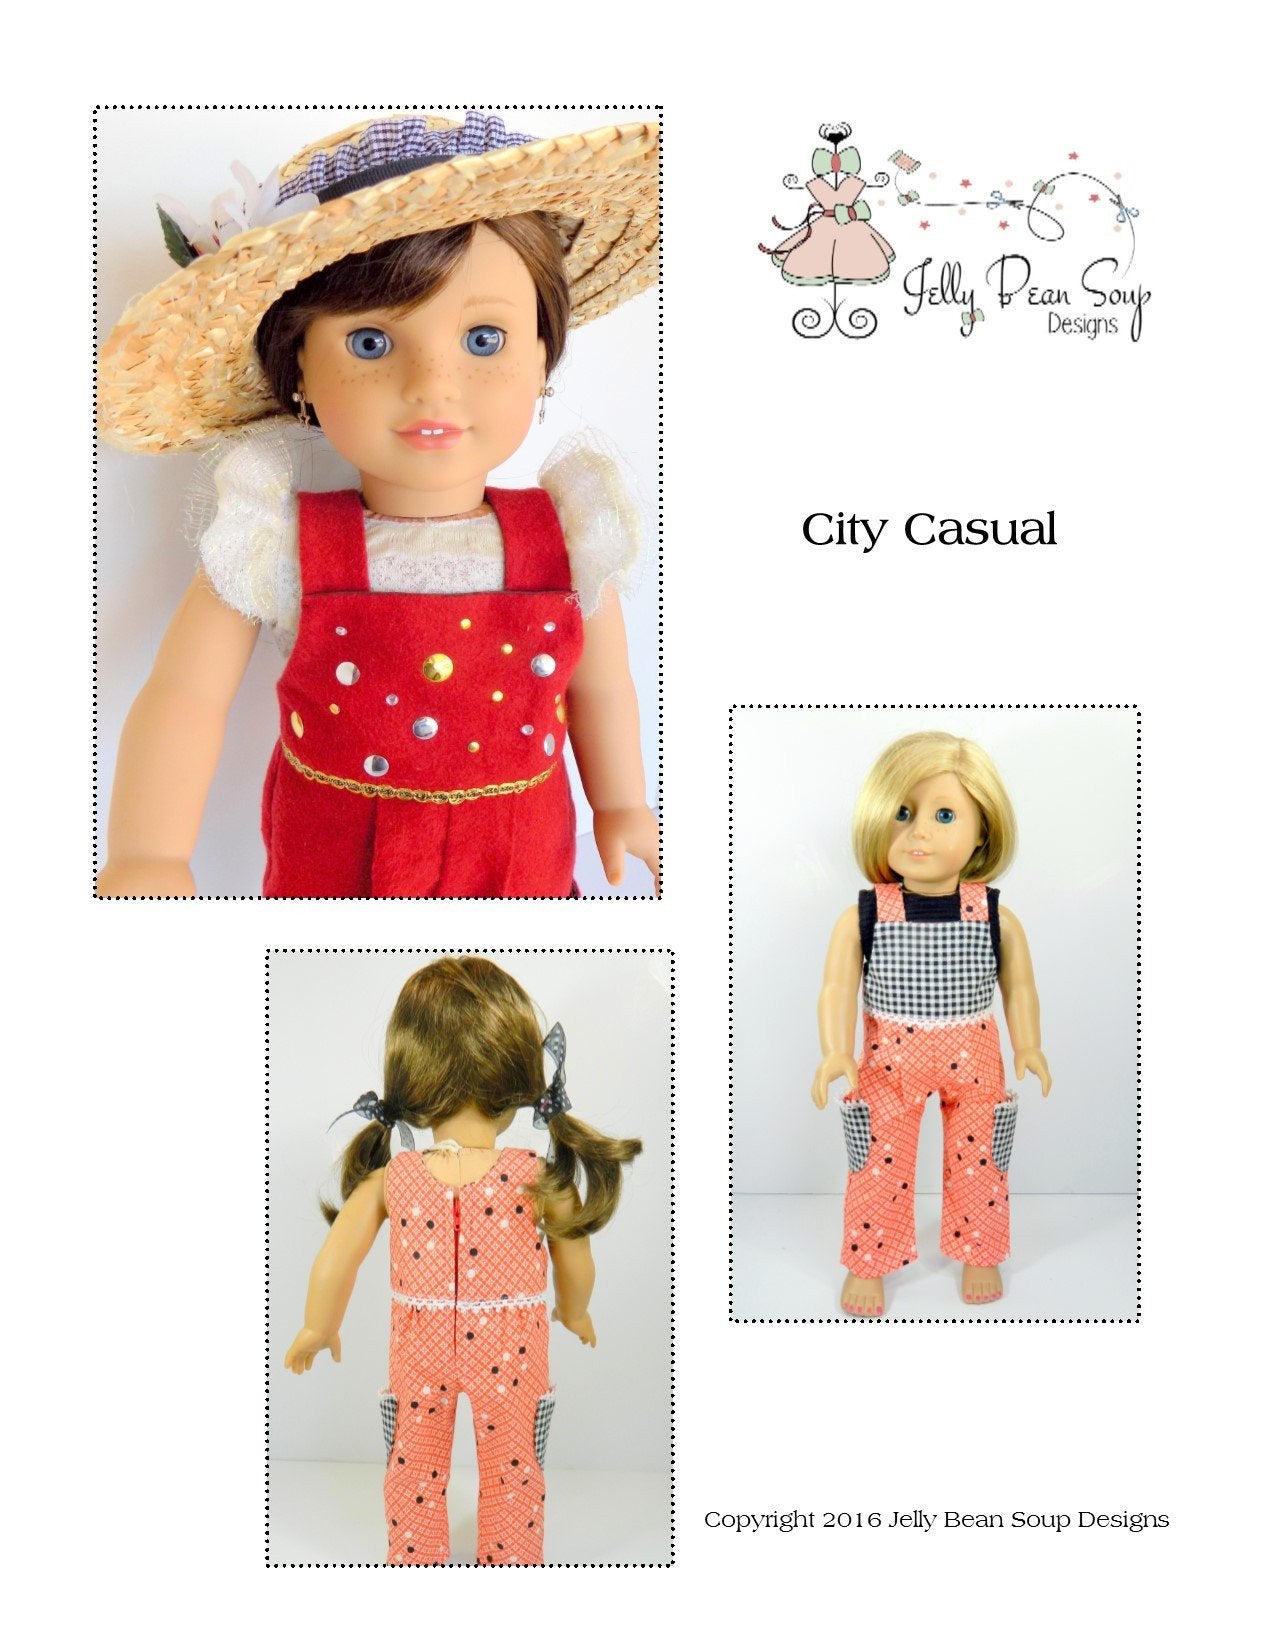 Free Printable 18 Doll Clothes Patterns American Girl - Bing images  18  inch doll clothes pattern, Baby doll clothes patterns, Baby clothes patterns